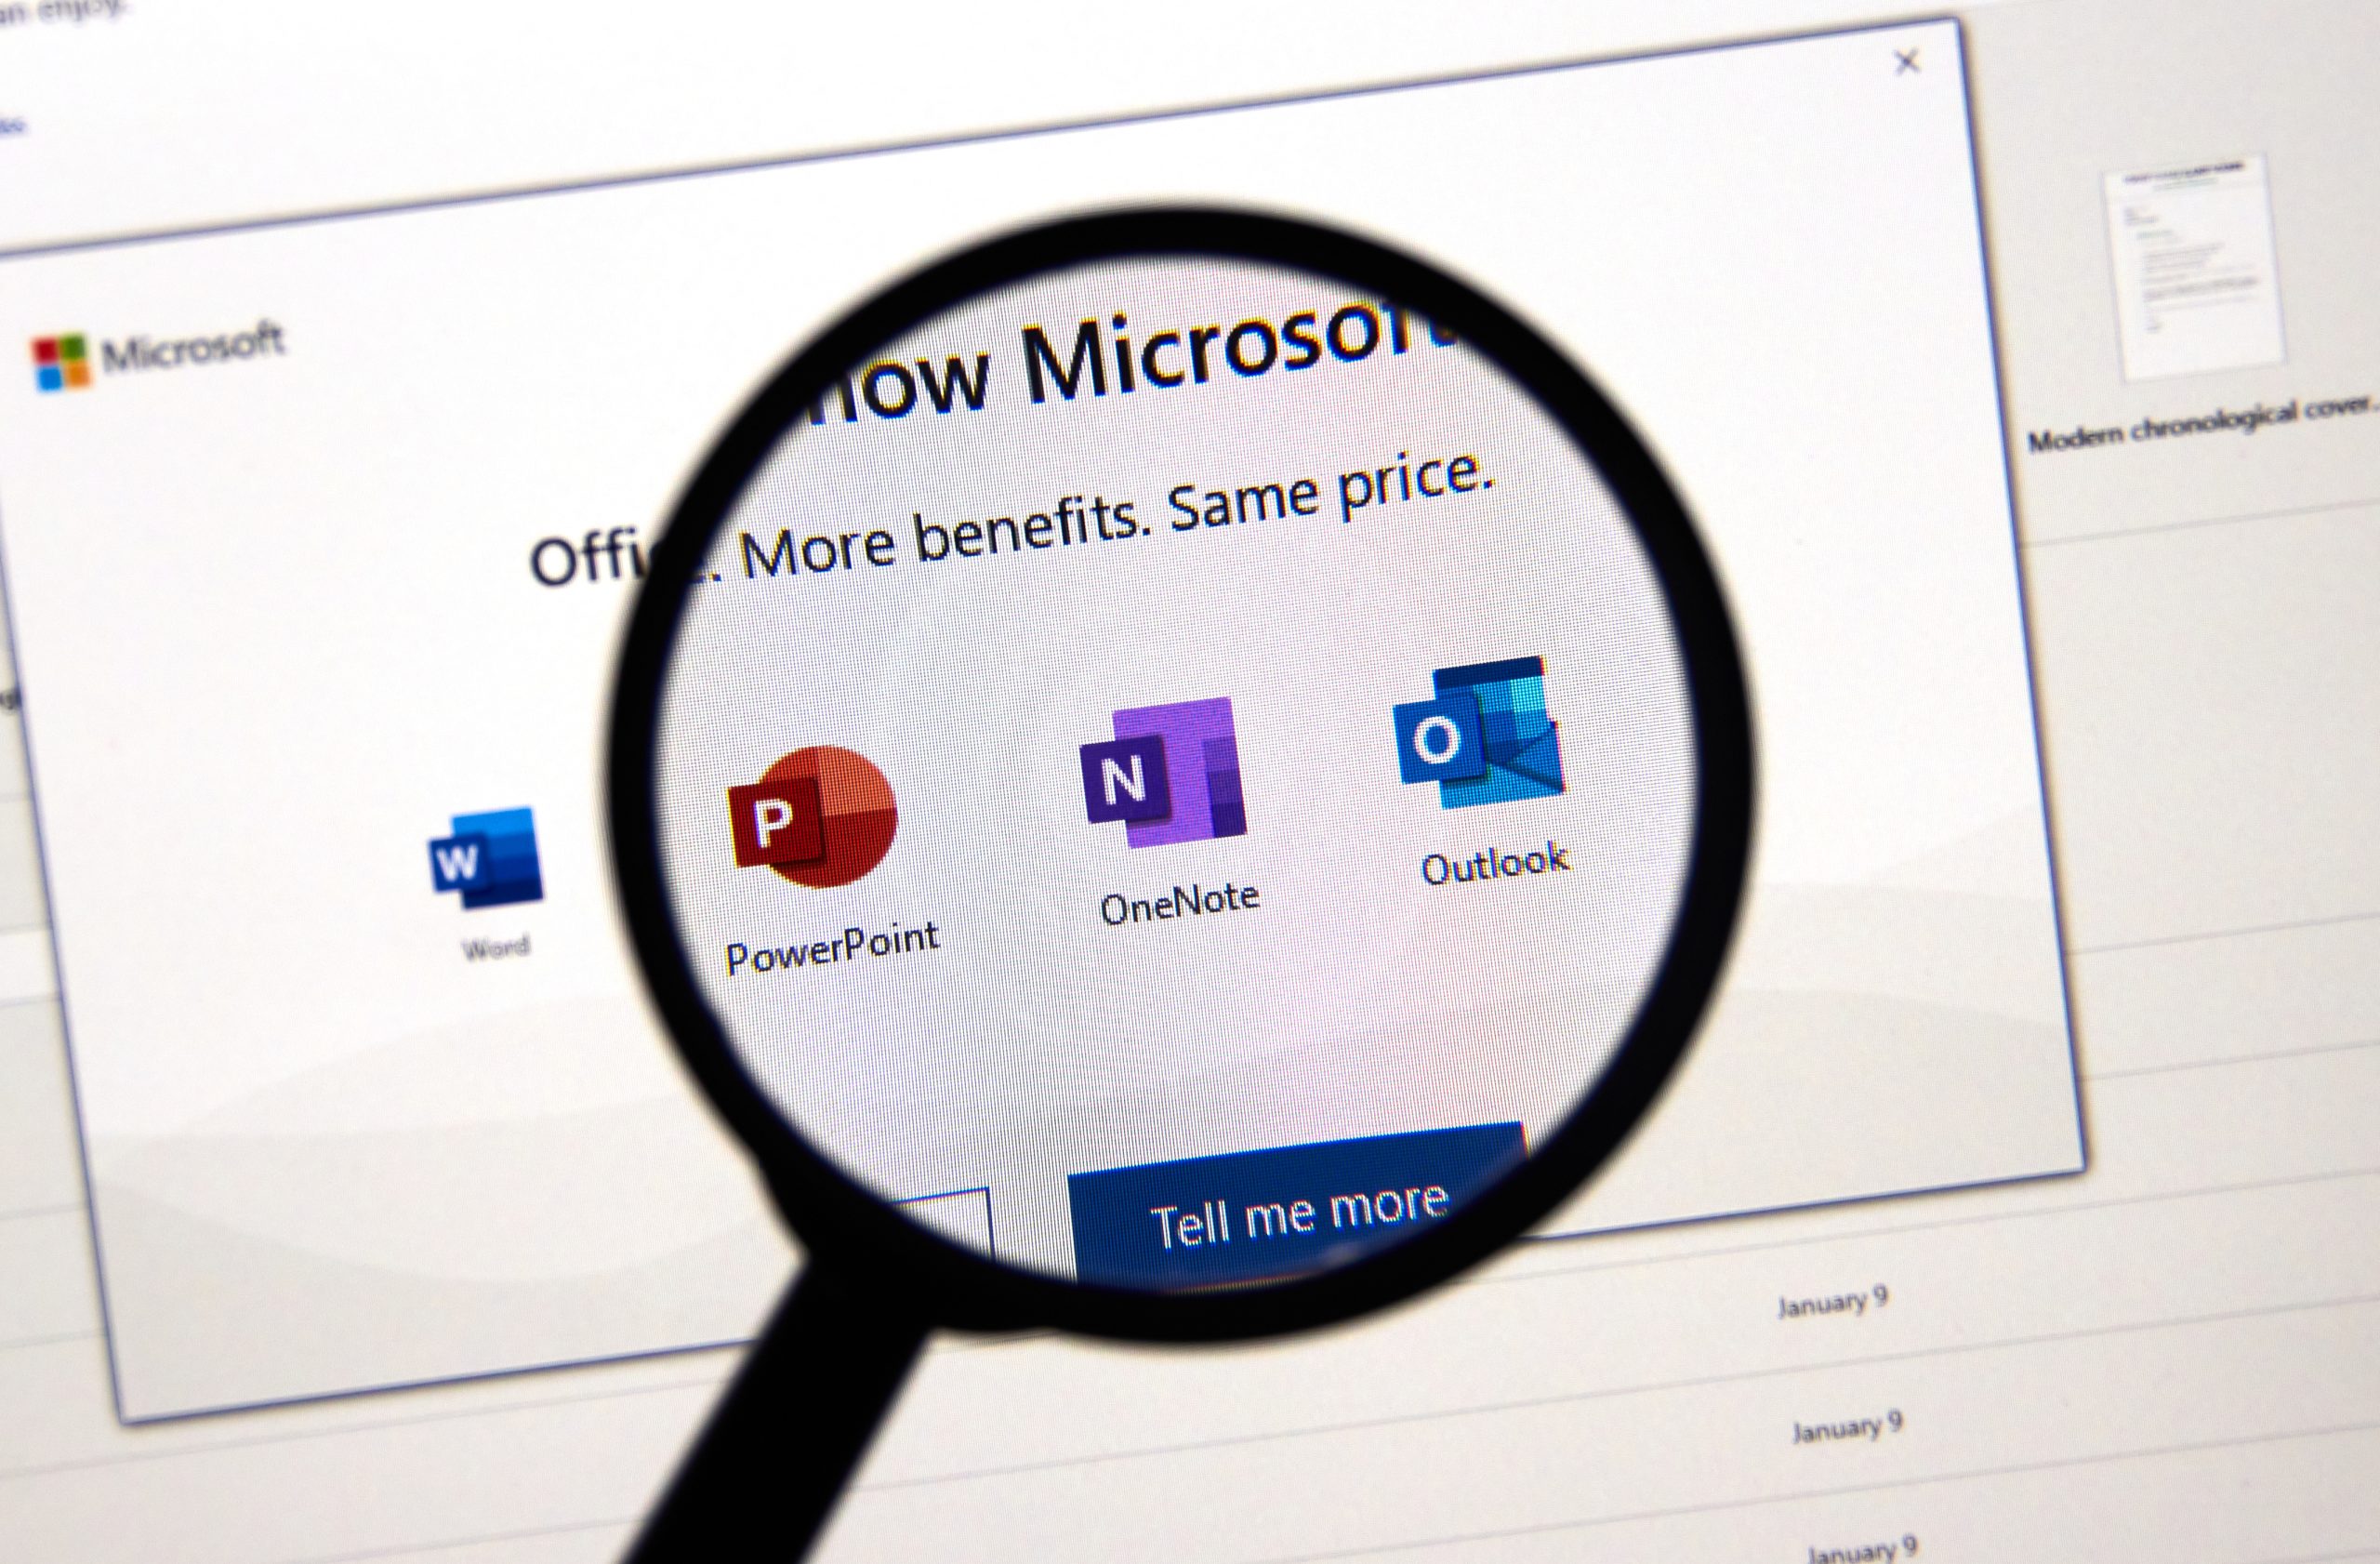 Microsoft 365 information screen with Magnifying glass highlighting PowerPoint, OneNote and, Outlook Icons